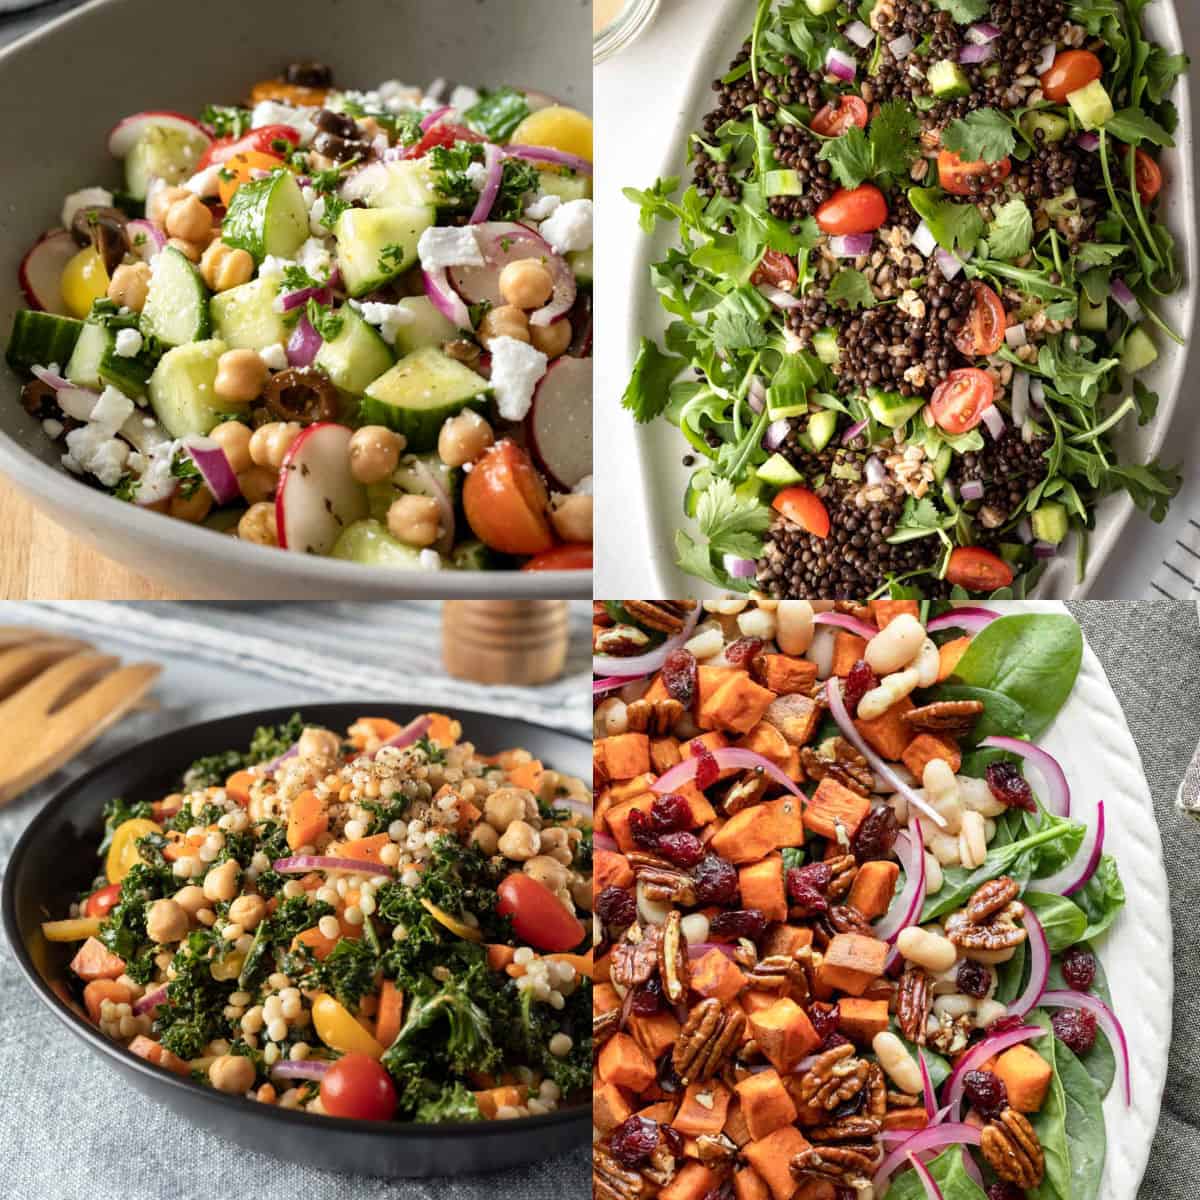 Salad Toppings That Will Make You CRAVE Salad! - My Quiet Kitchen